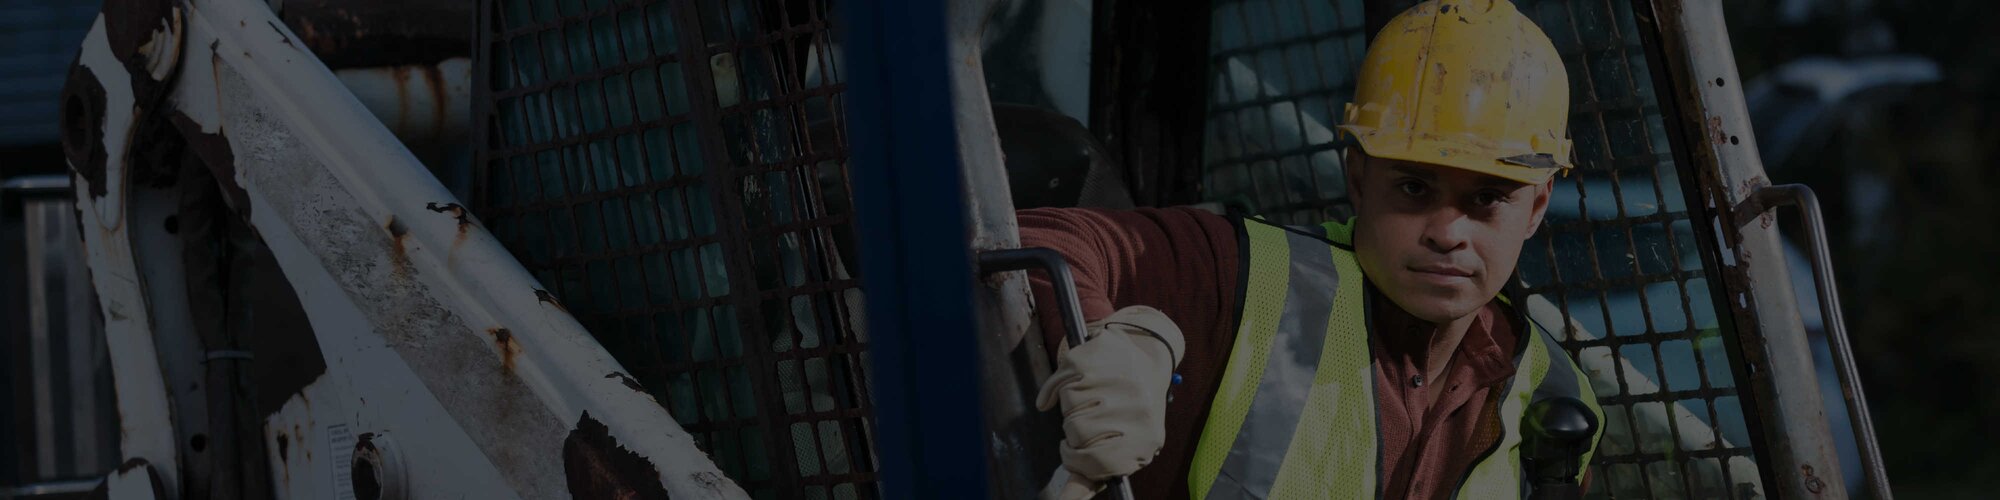 An operator exiting the cab of a machine, wearing a hard hat and yellow vest